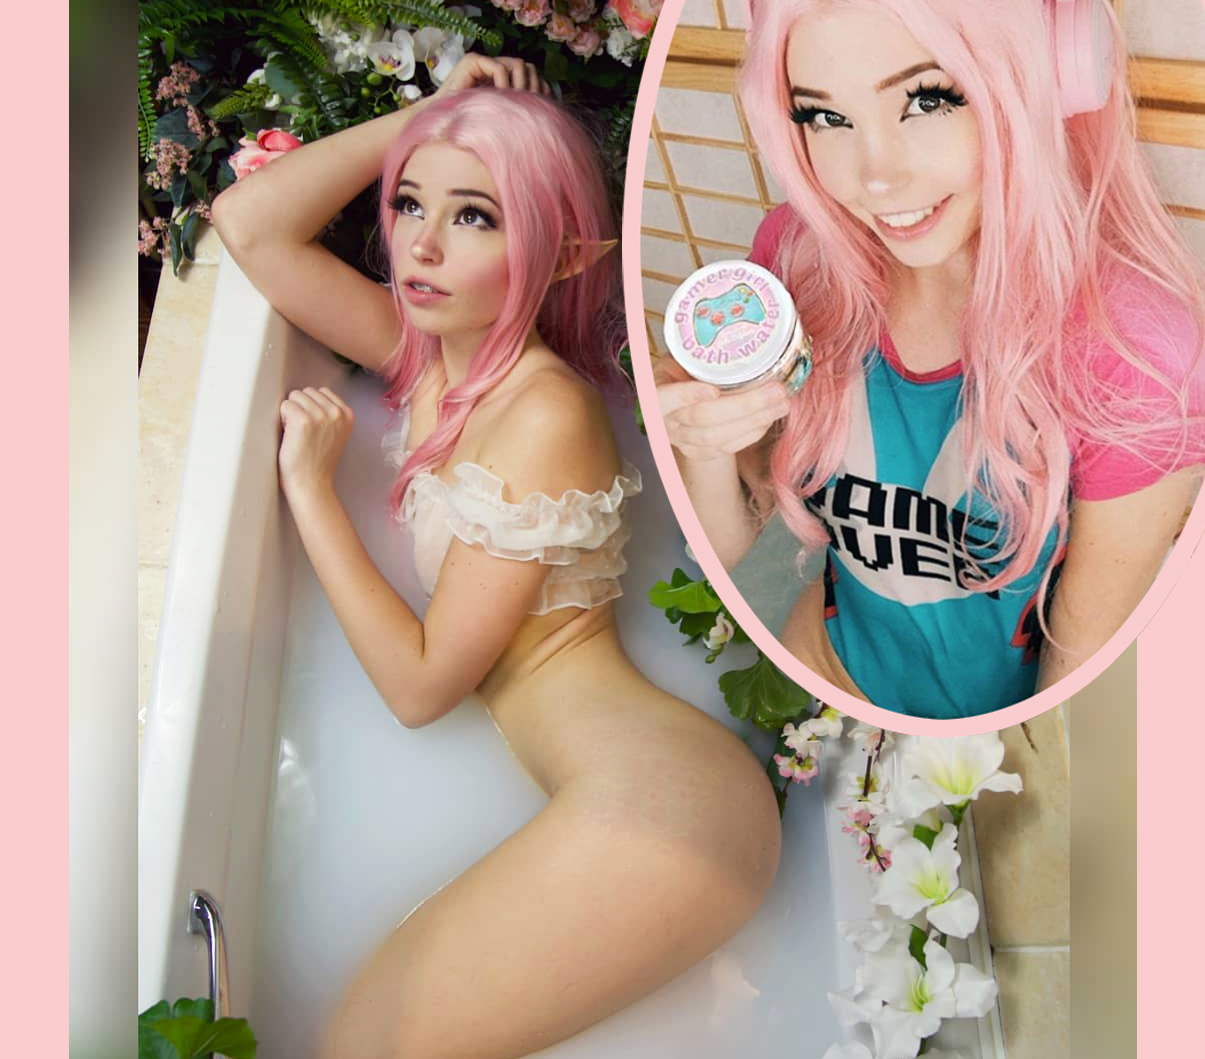 Belle delphine must stopped pic